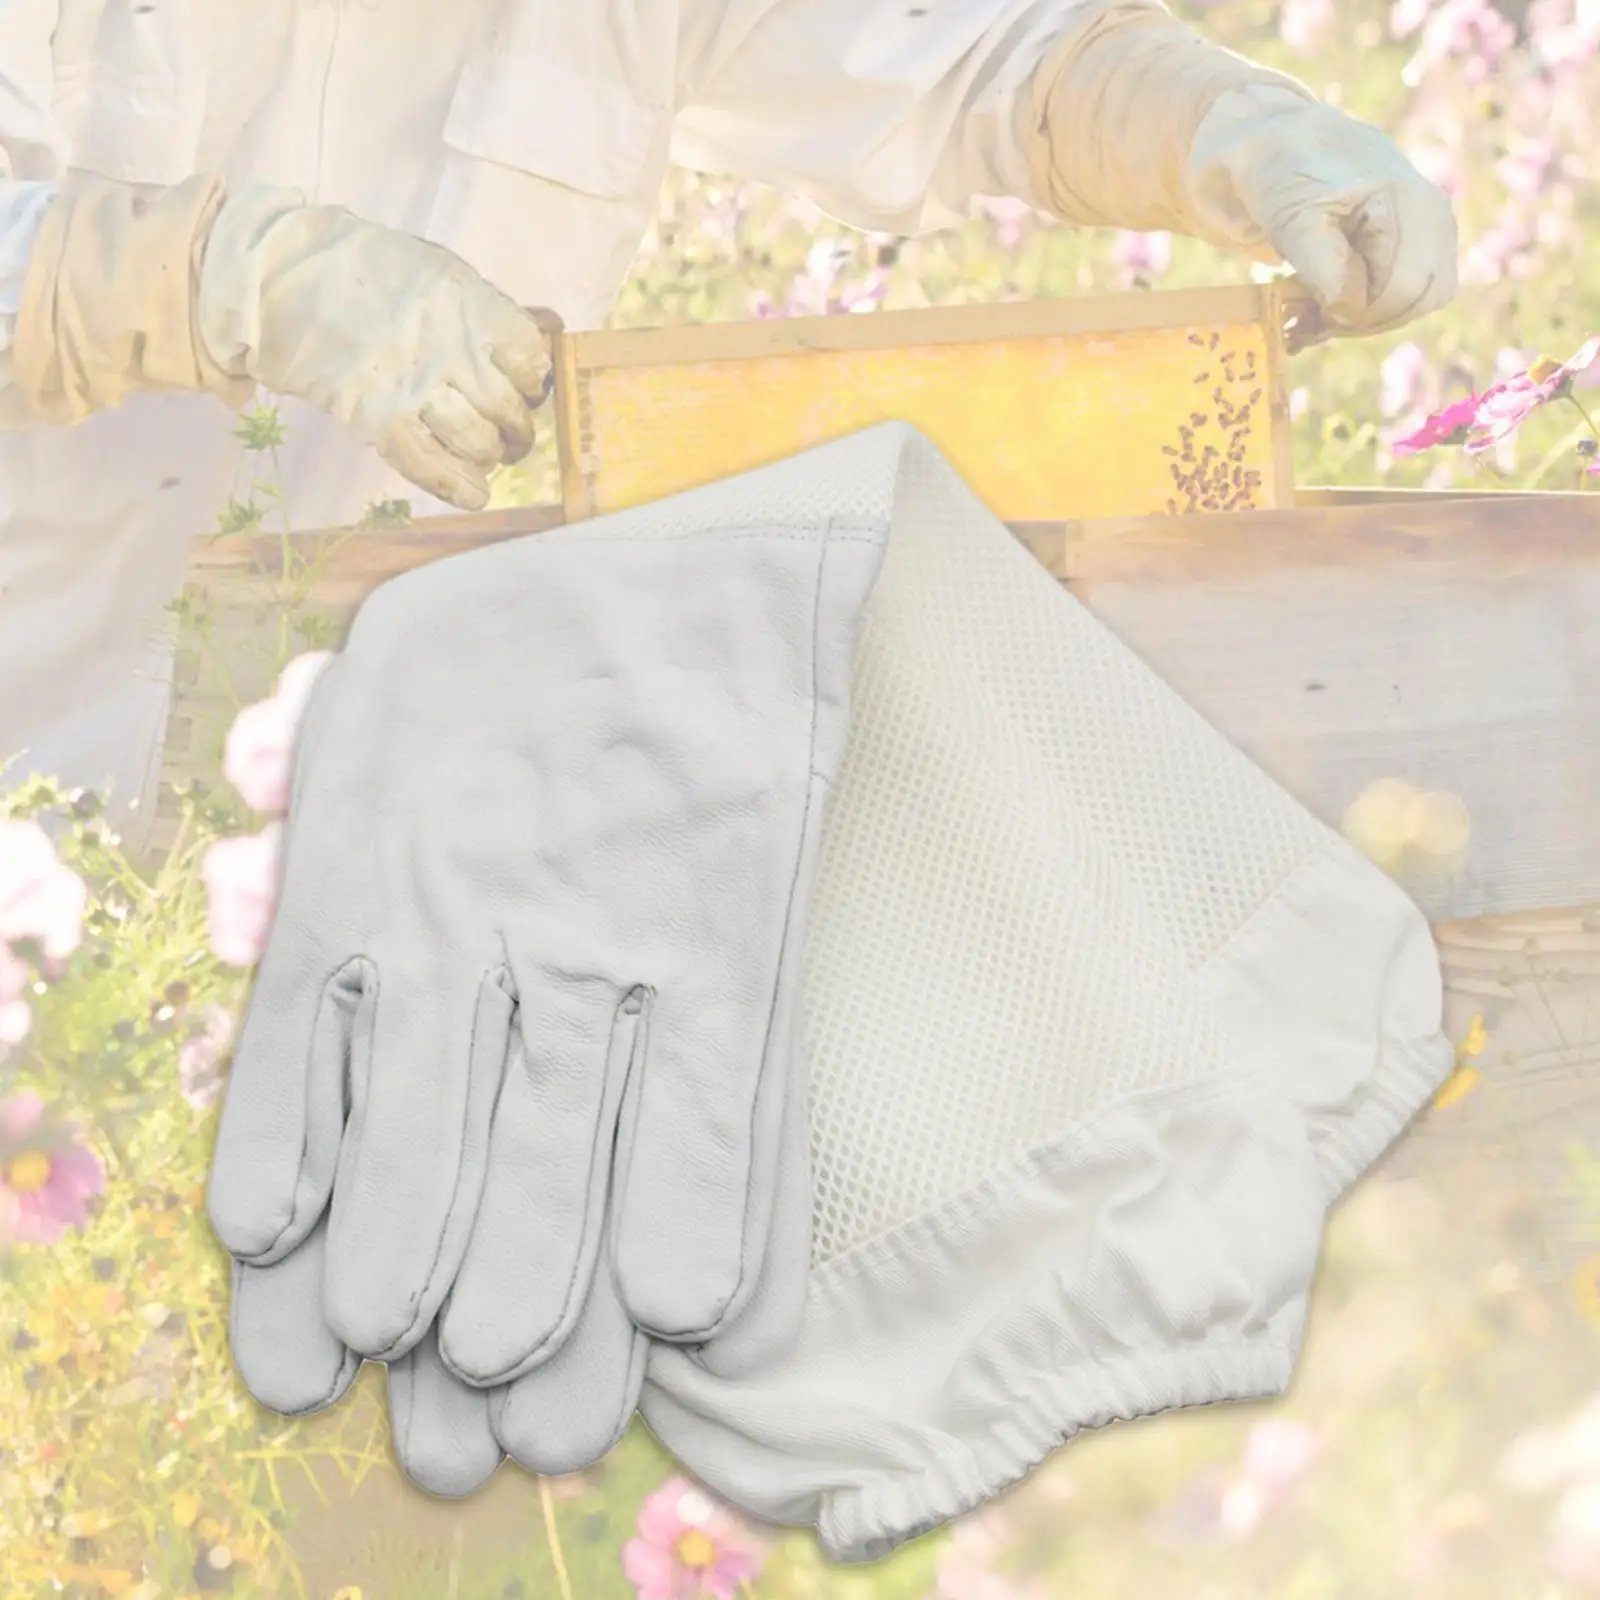 Beekeeping Gloves Protective Breathable Comfortable Anti Scratch Beekeeper Gloves for Men Apiculture Tools Cactus Rose Pruning